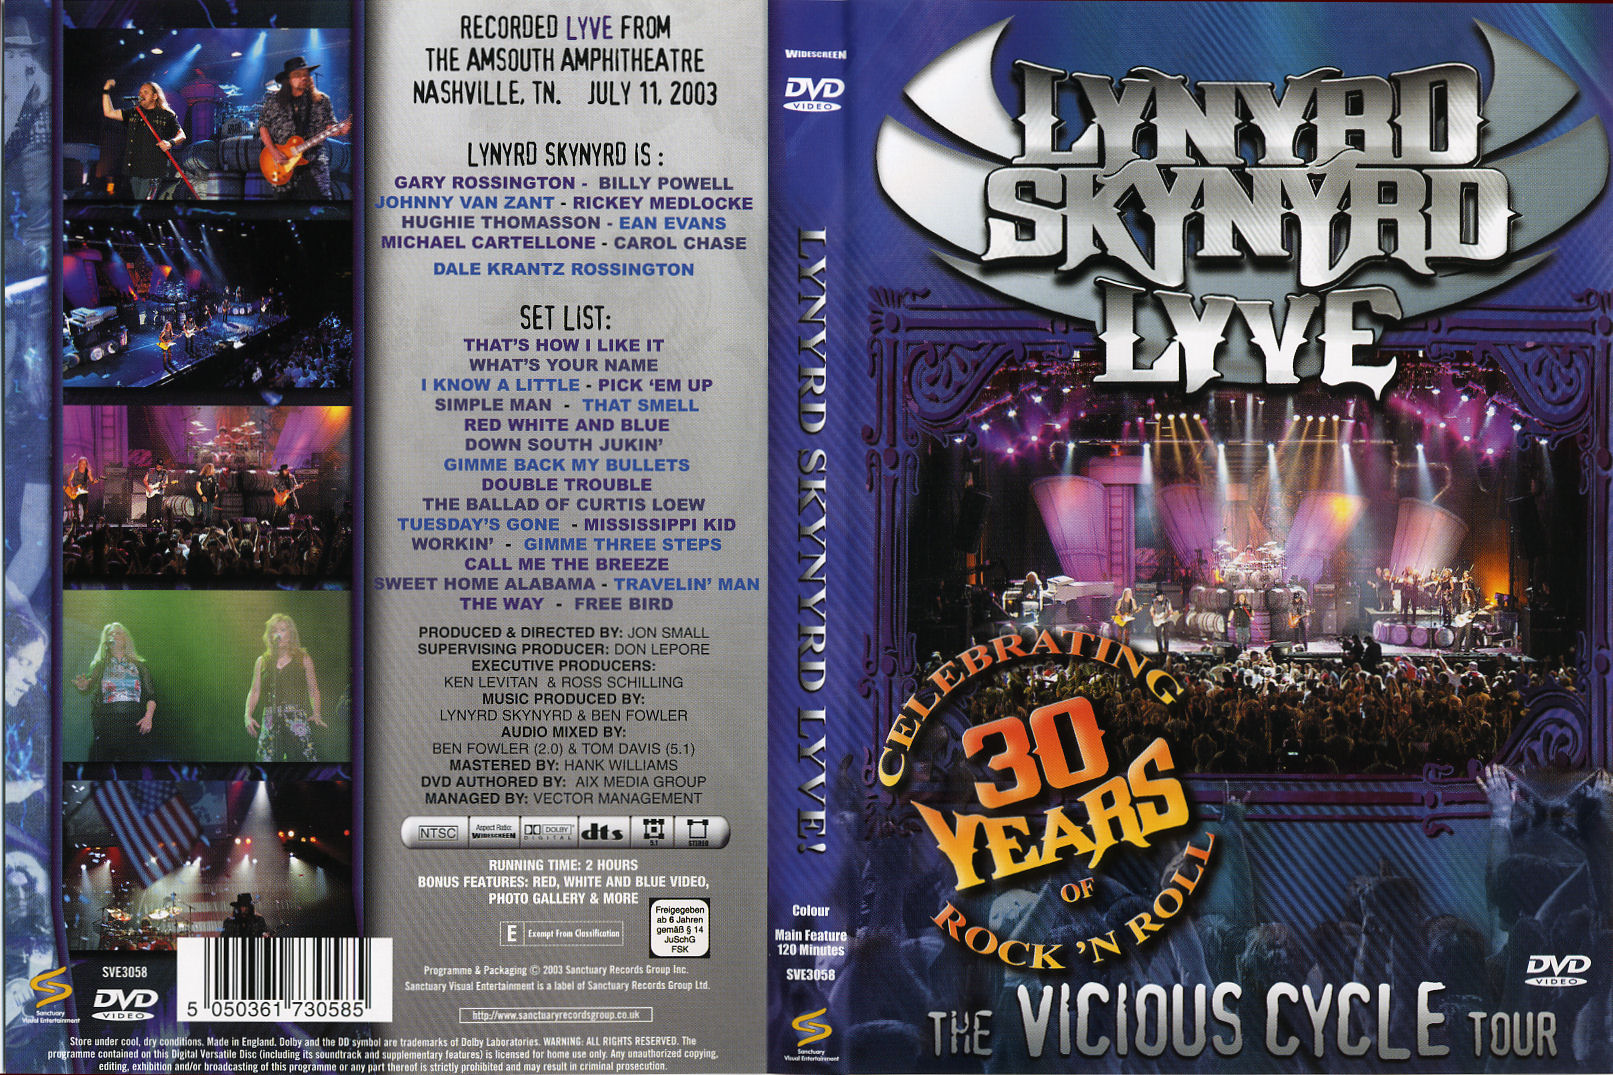 Jaquette DVD Lynyrd Skynyrd - The vicious cycle tour